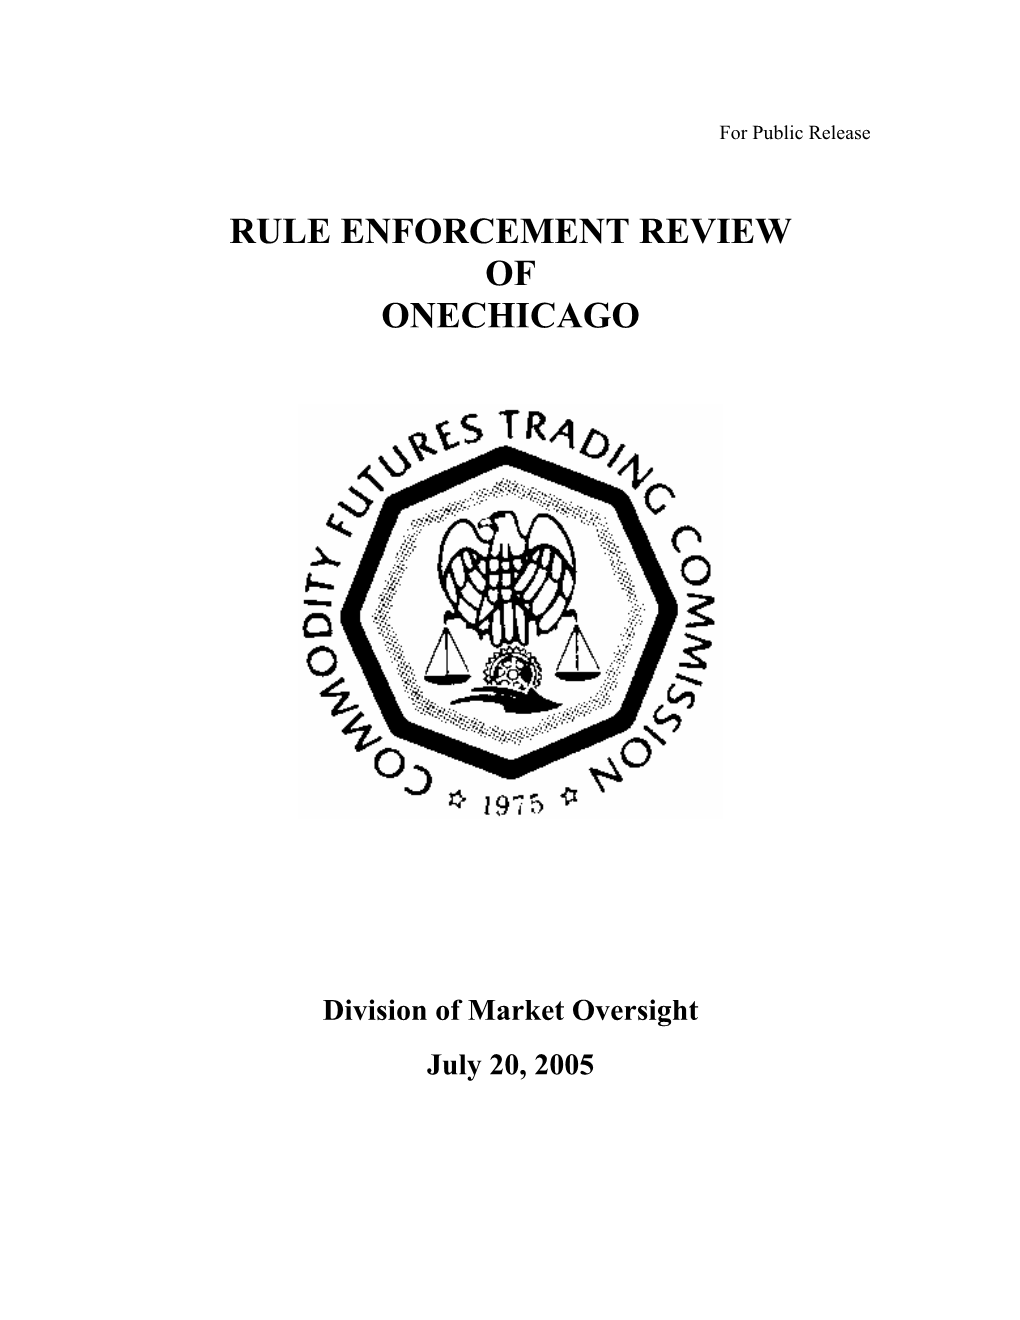 Rule Enforcement Review of Onechicago